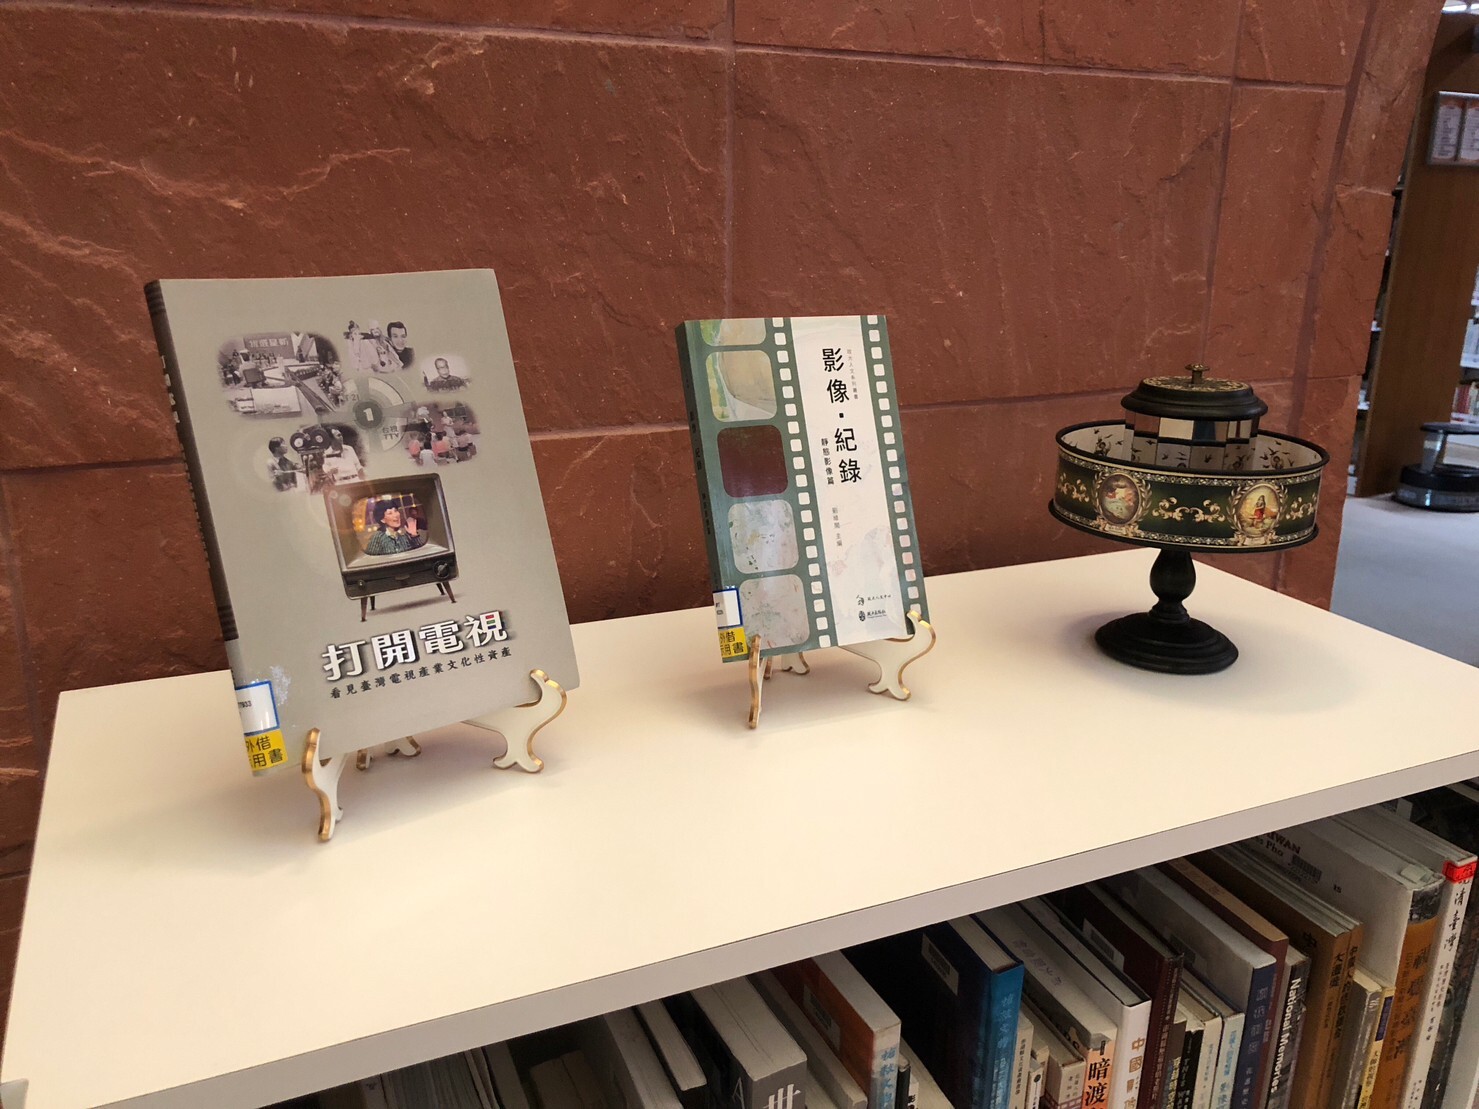 NCKU Library hosts a historical image rescue book exhibition.